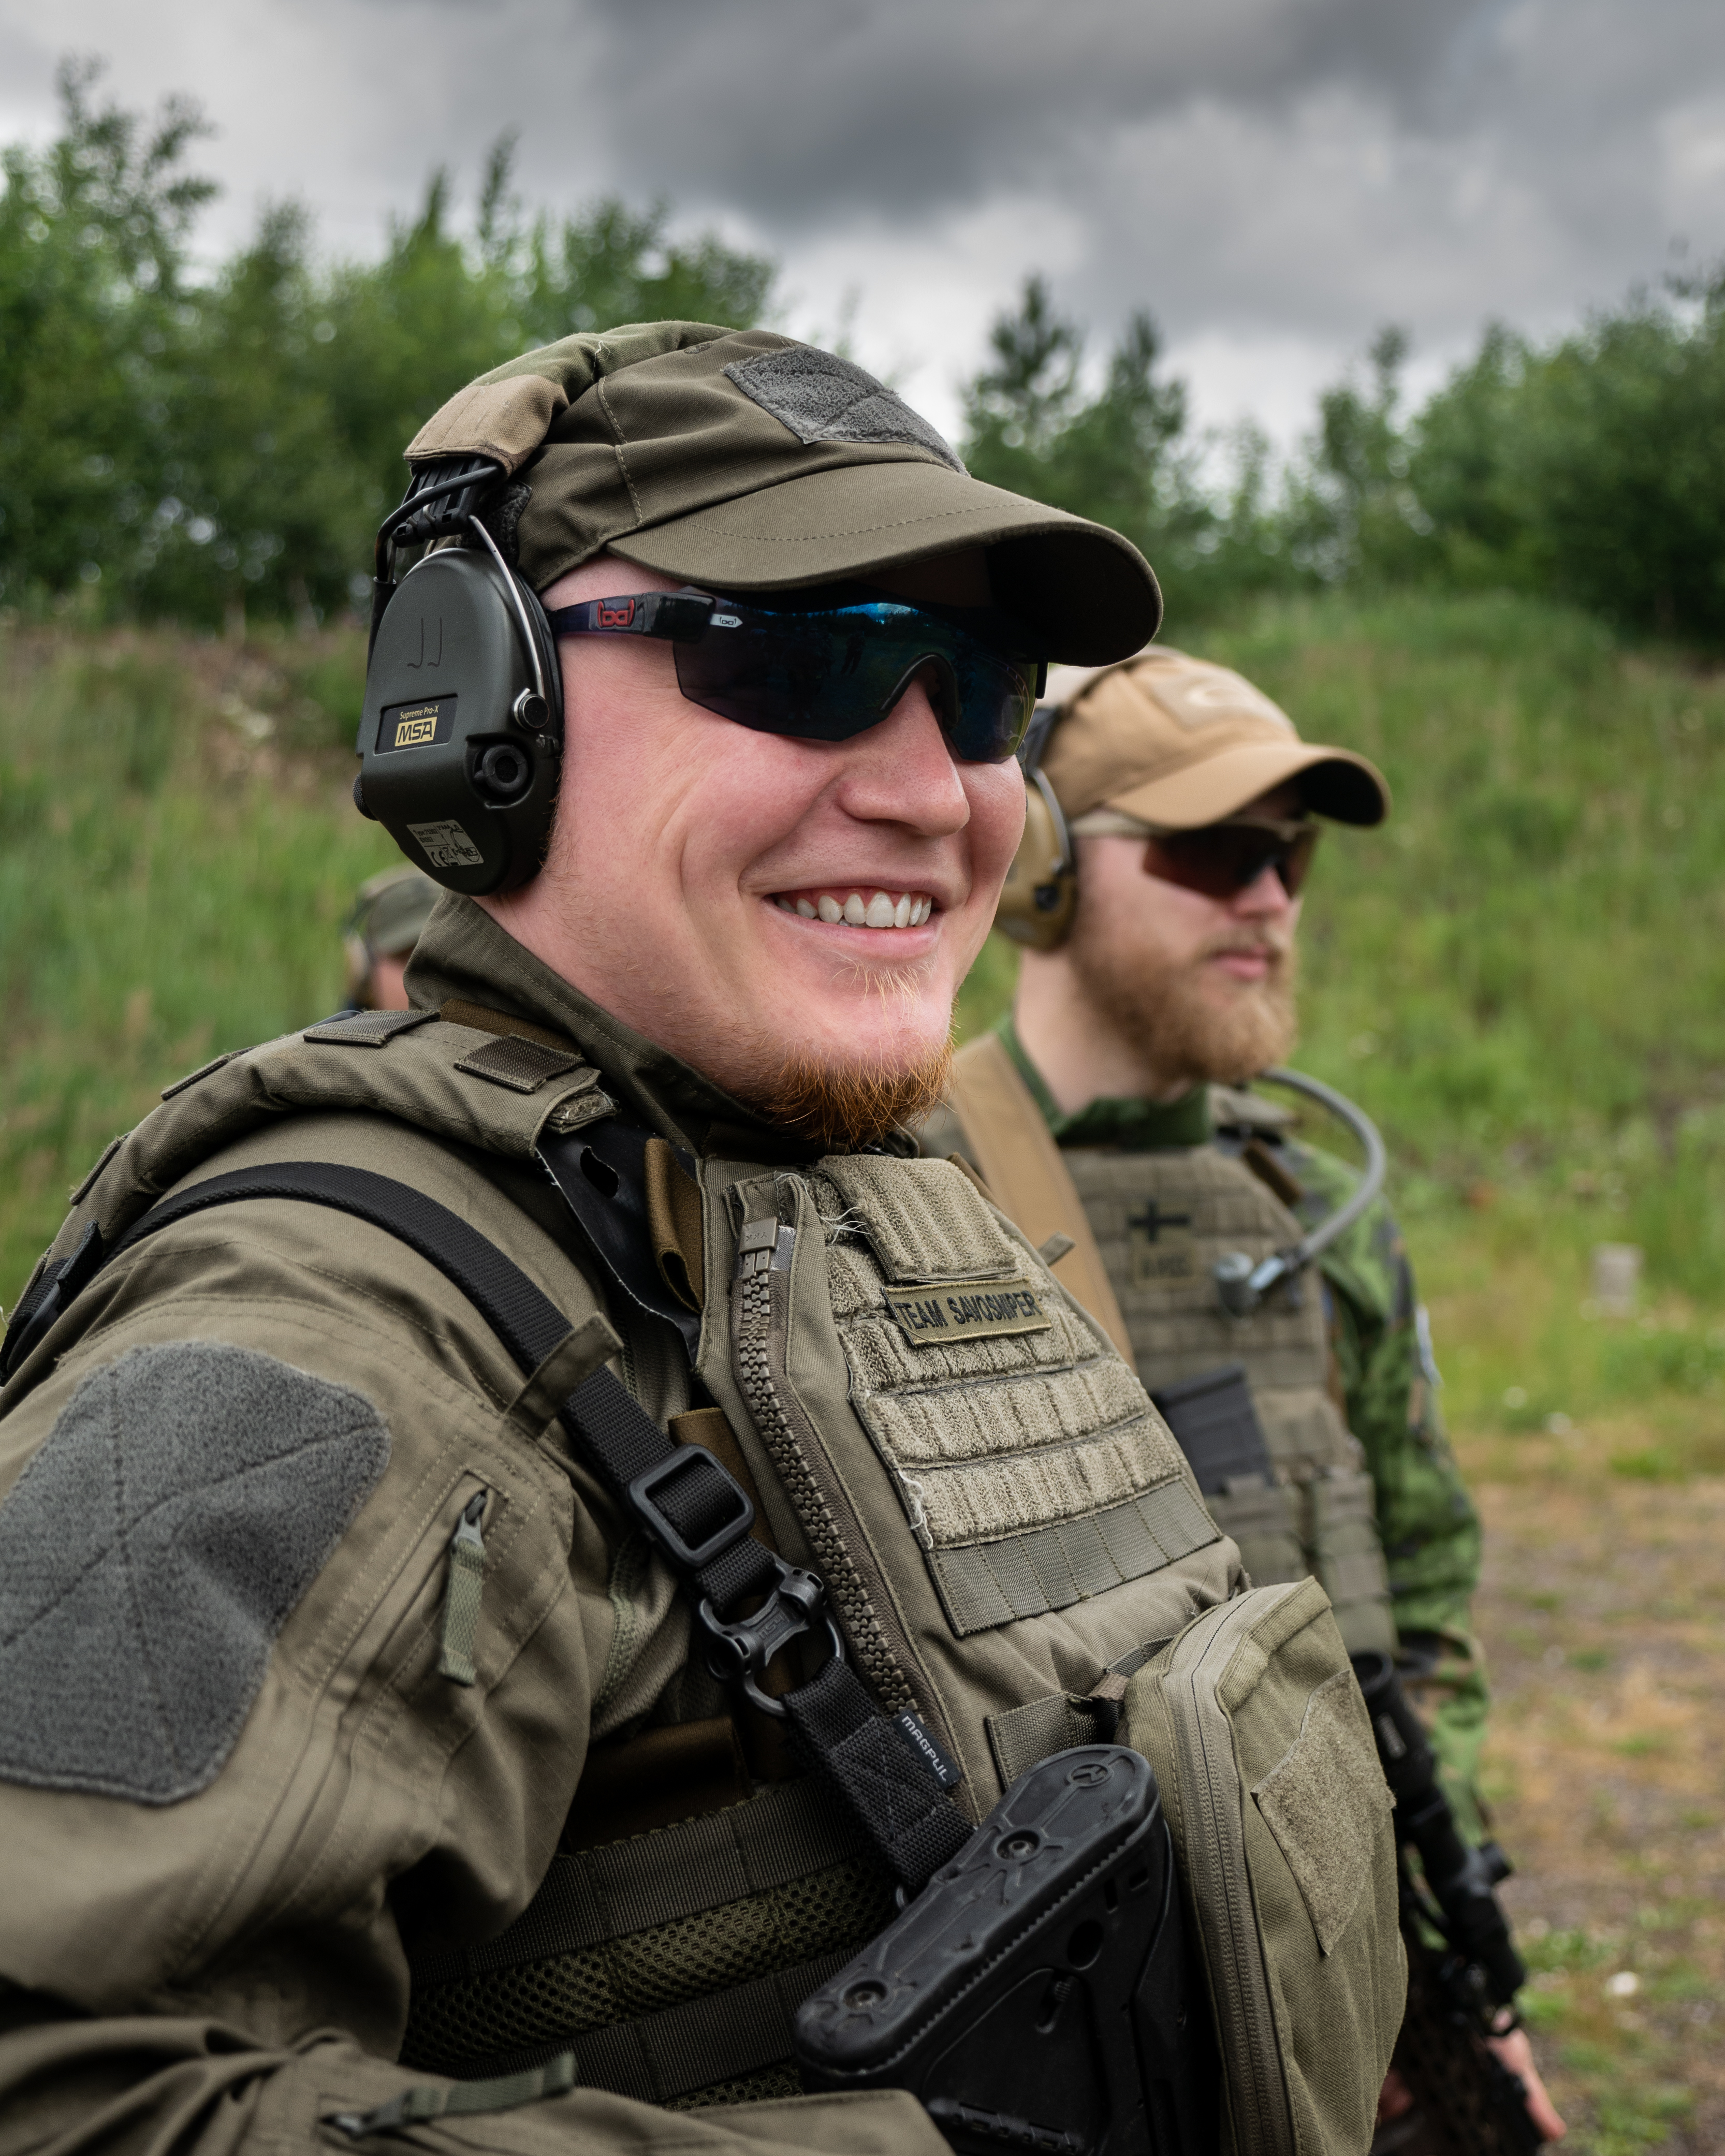 A man with sunglasses is smiling. He is wearing uf pro tactical clothing. He has a rifle AR10. There is man behind him. They are on a shooting range.